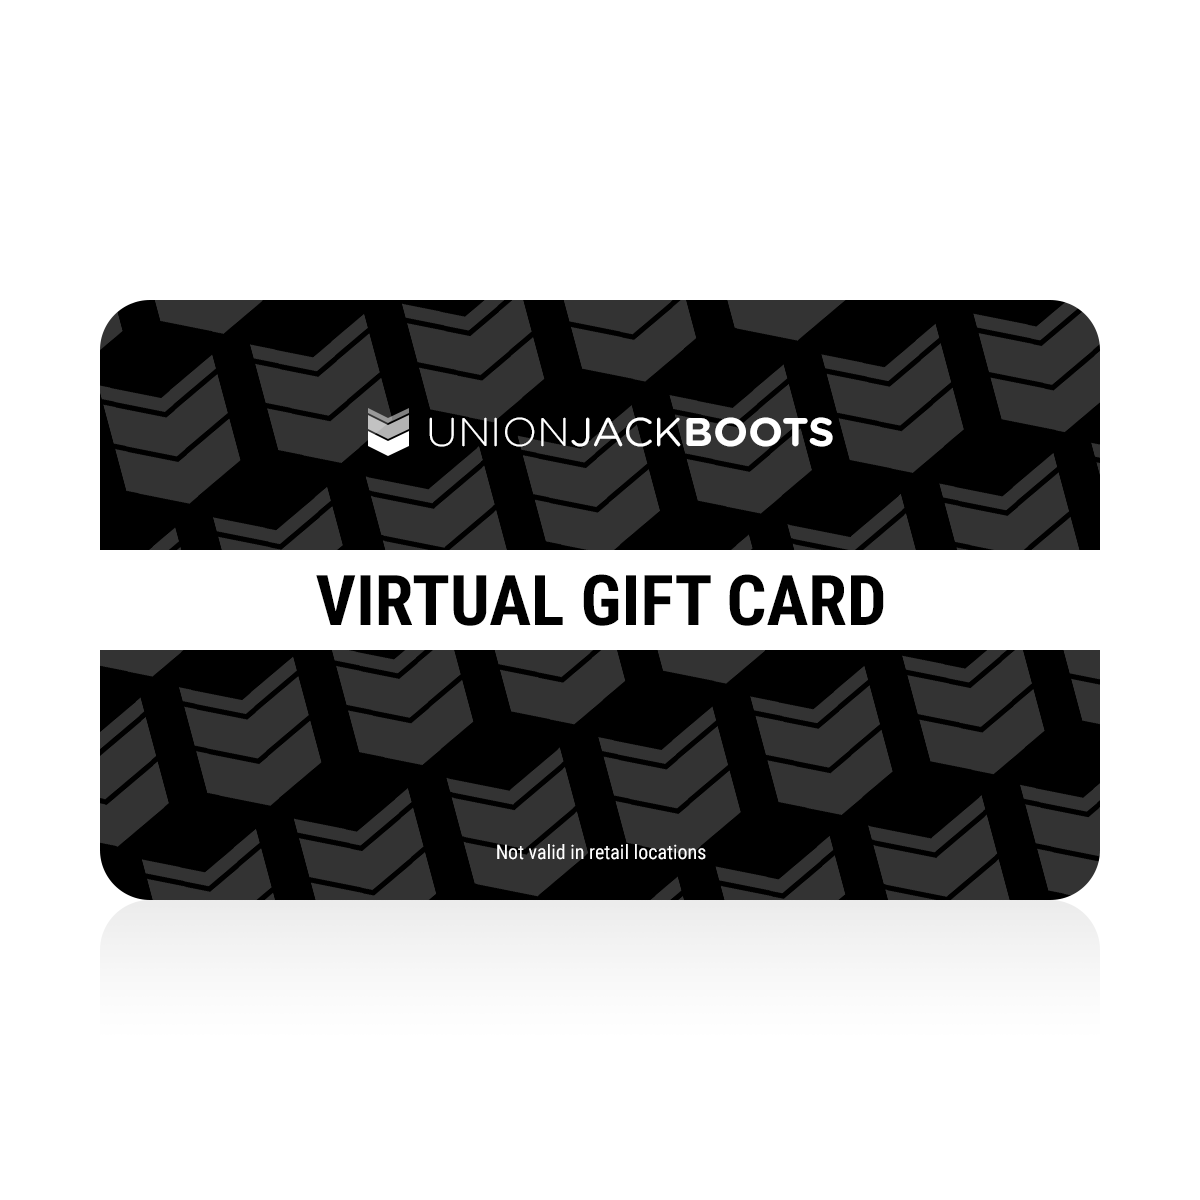 Union Jack Boots virtual gift card